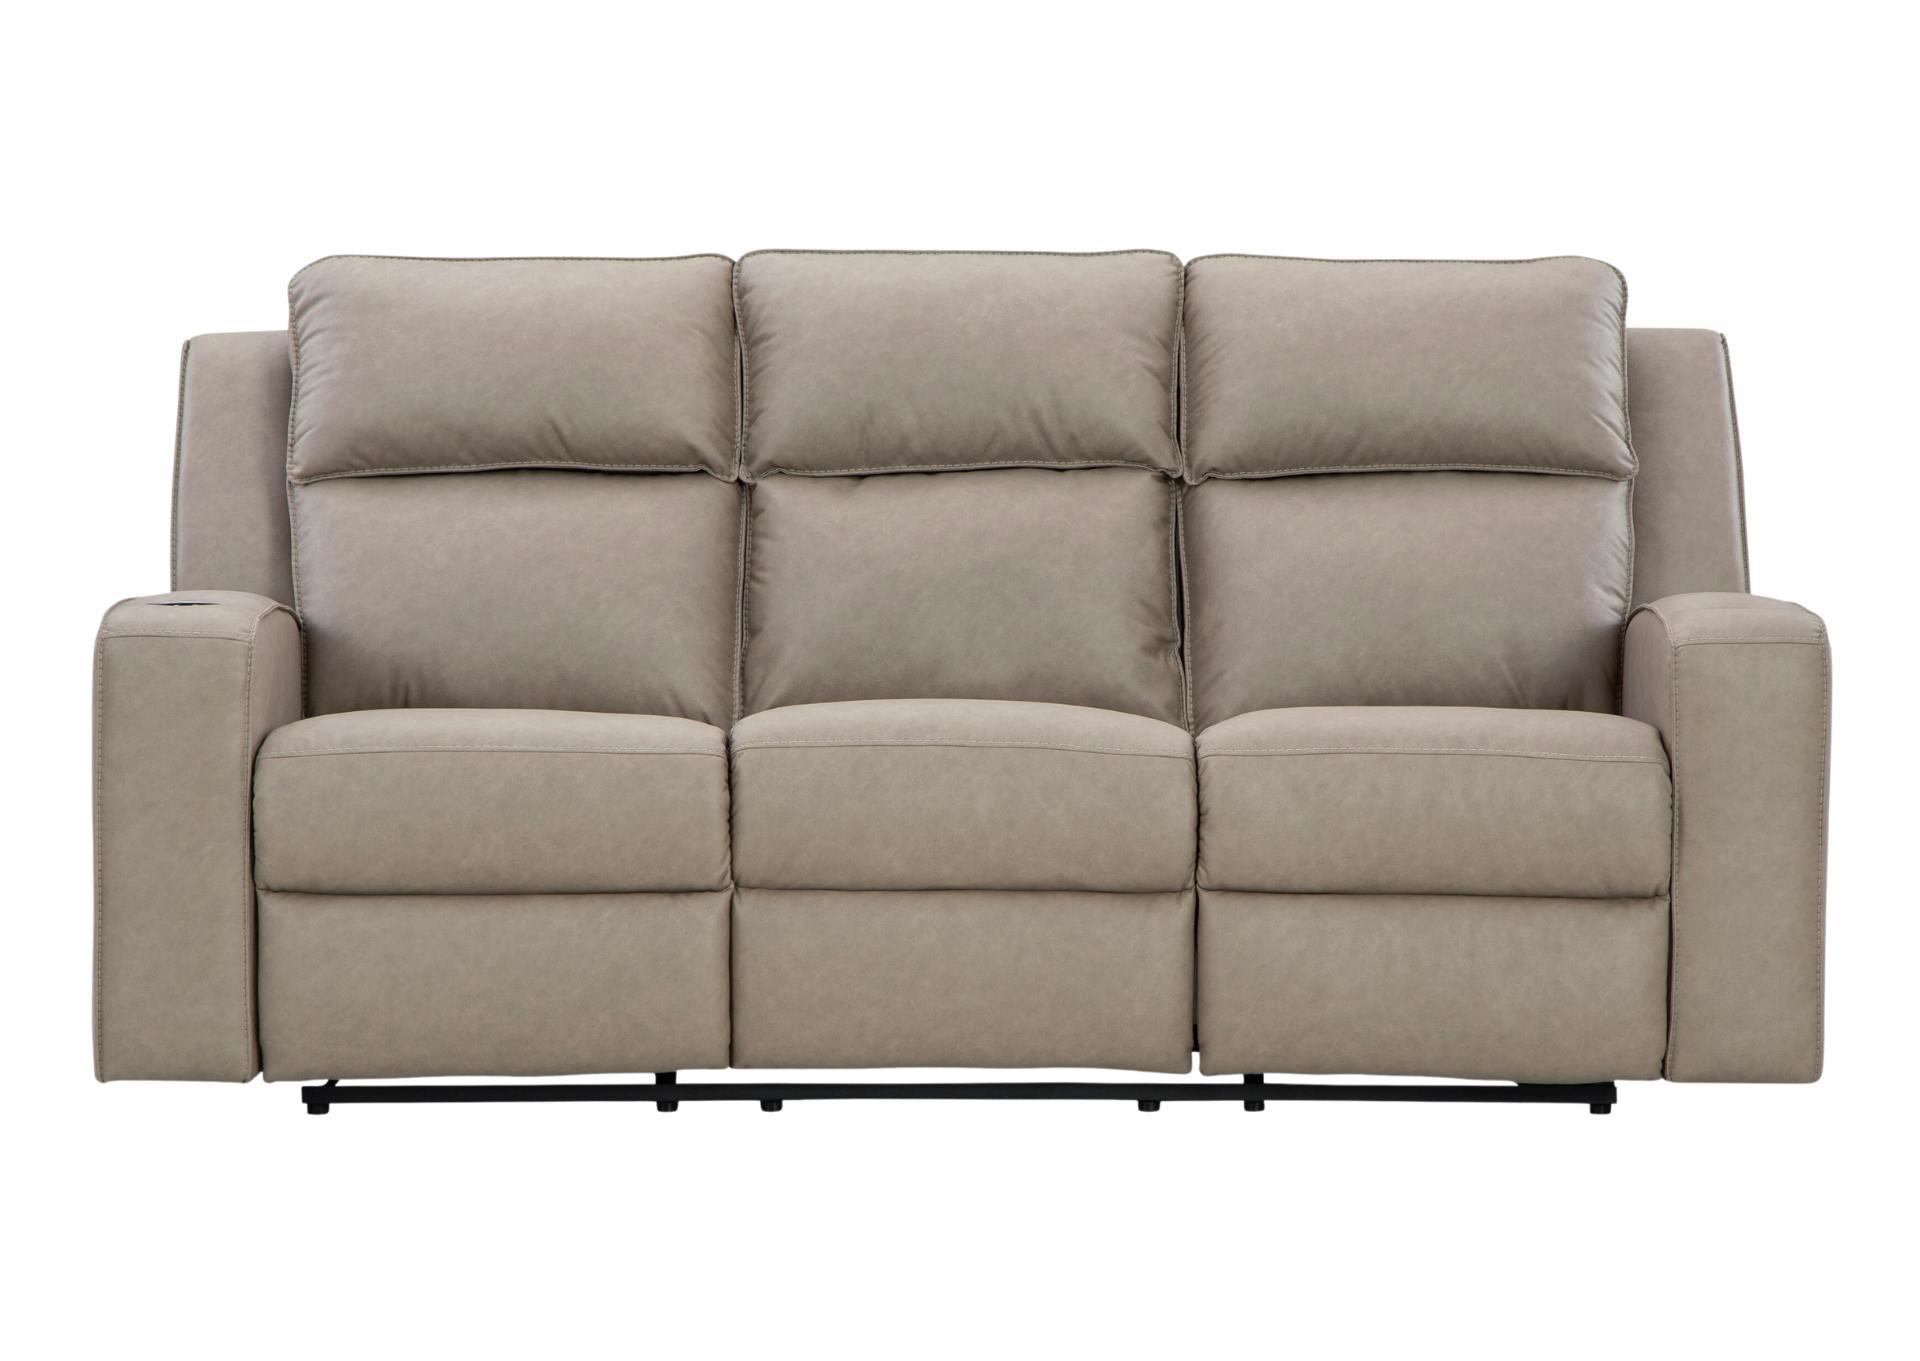 LAVENHORNE PEBBLE RECLINING SOFA WITH DROP DOWN TABLE